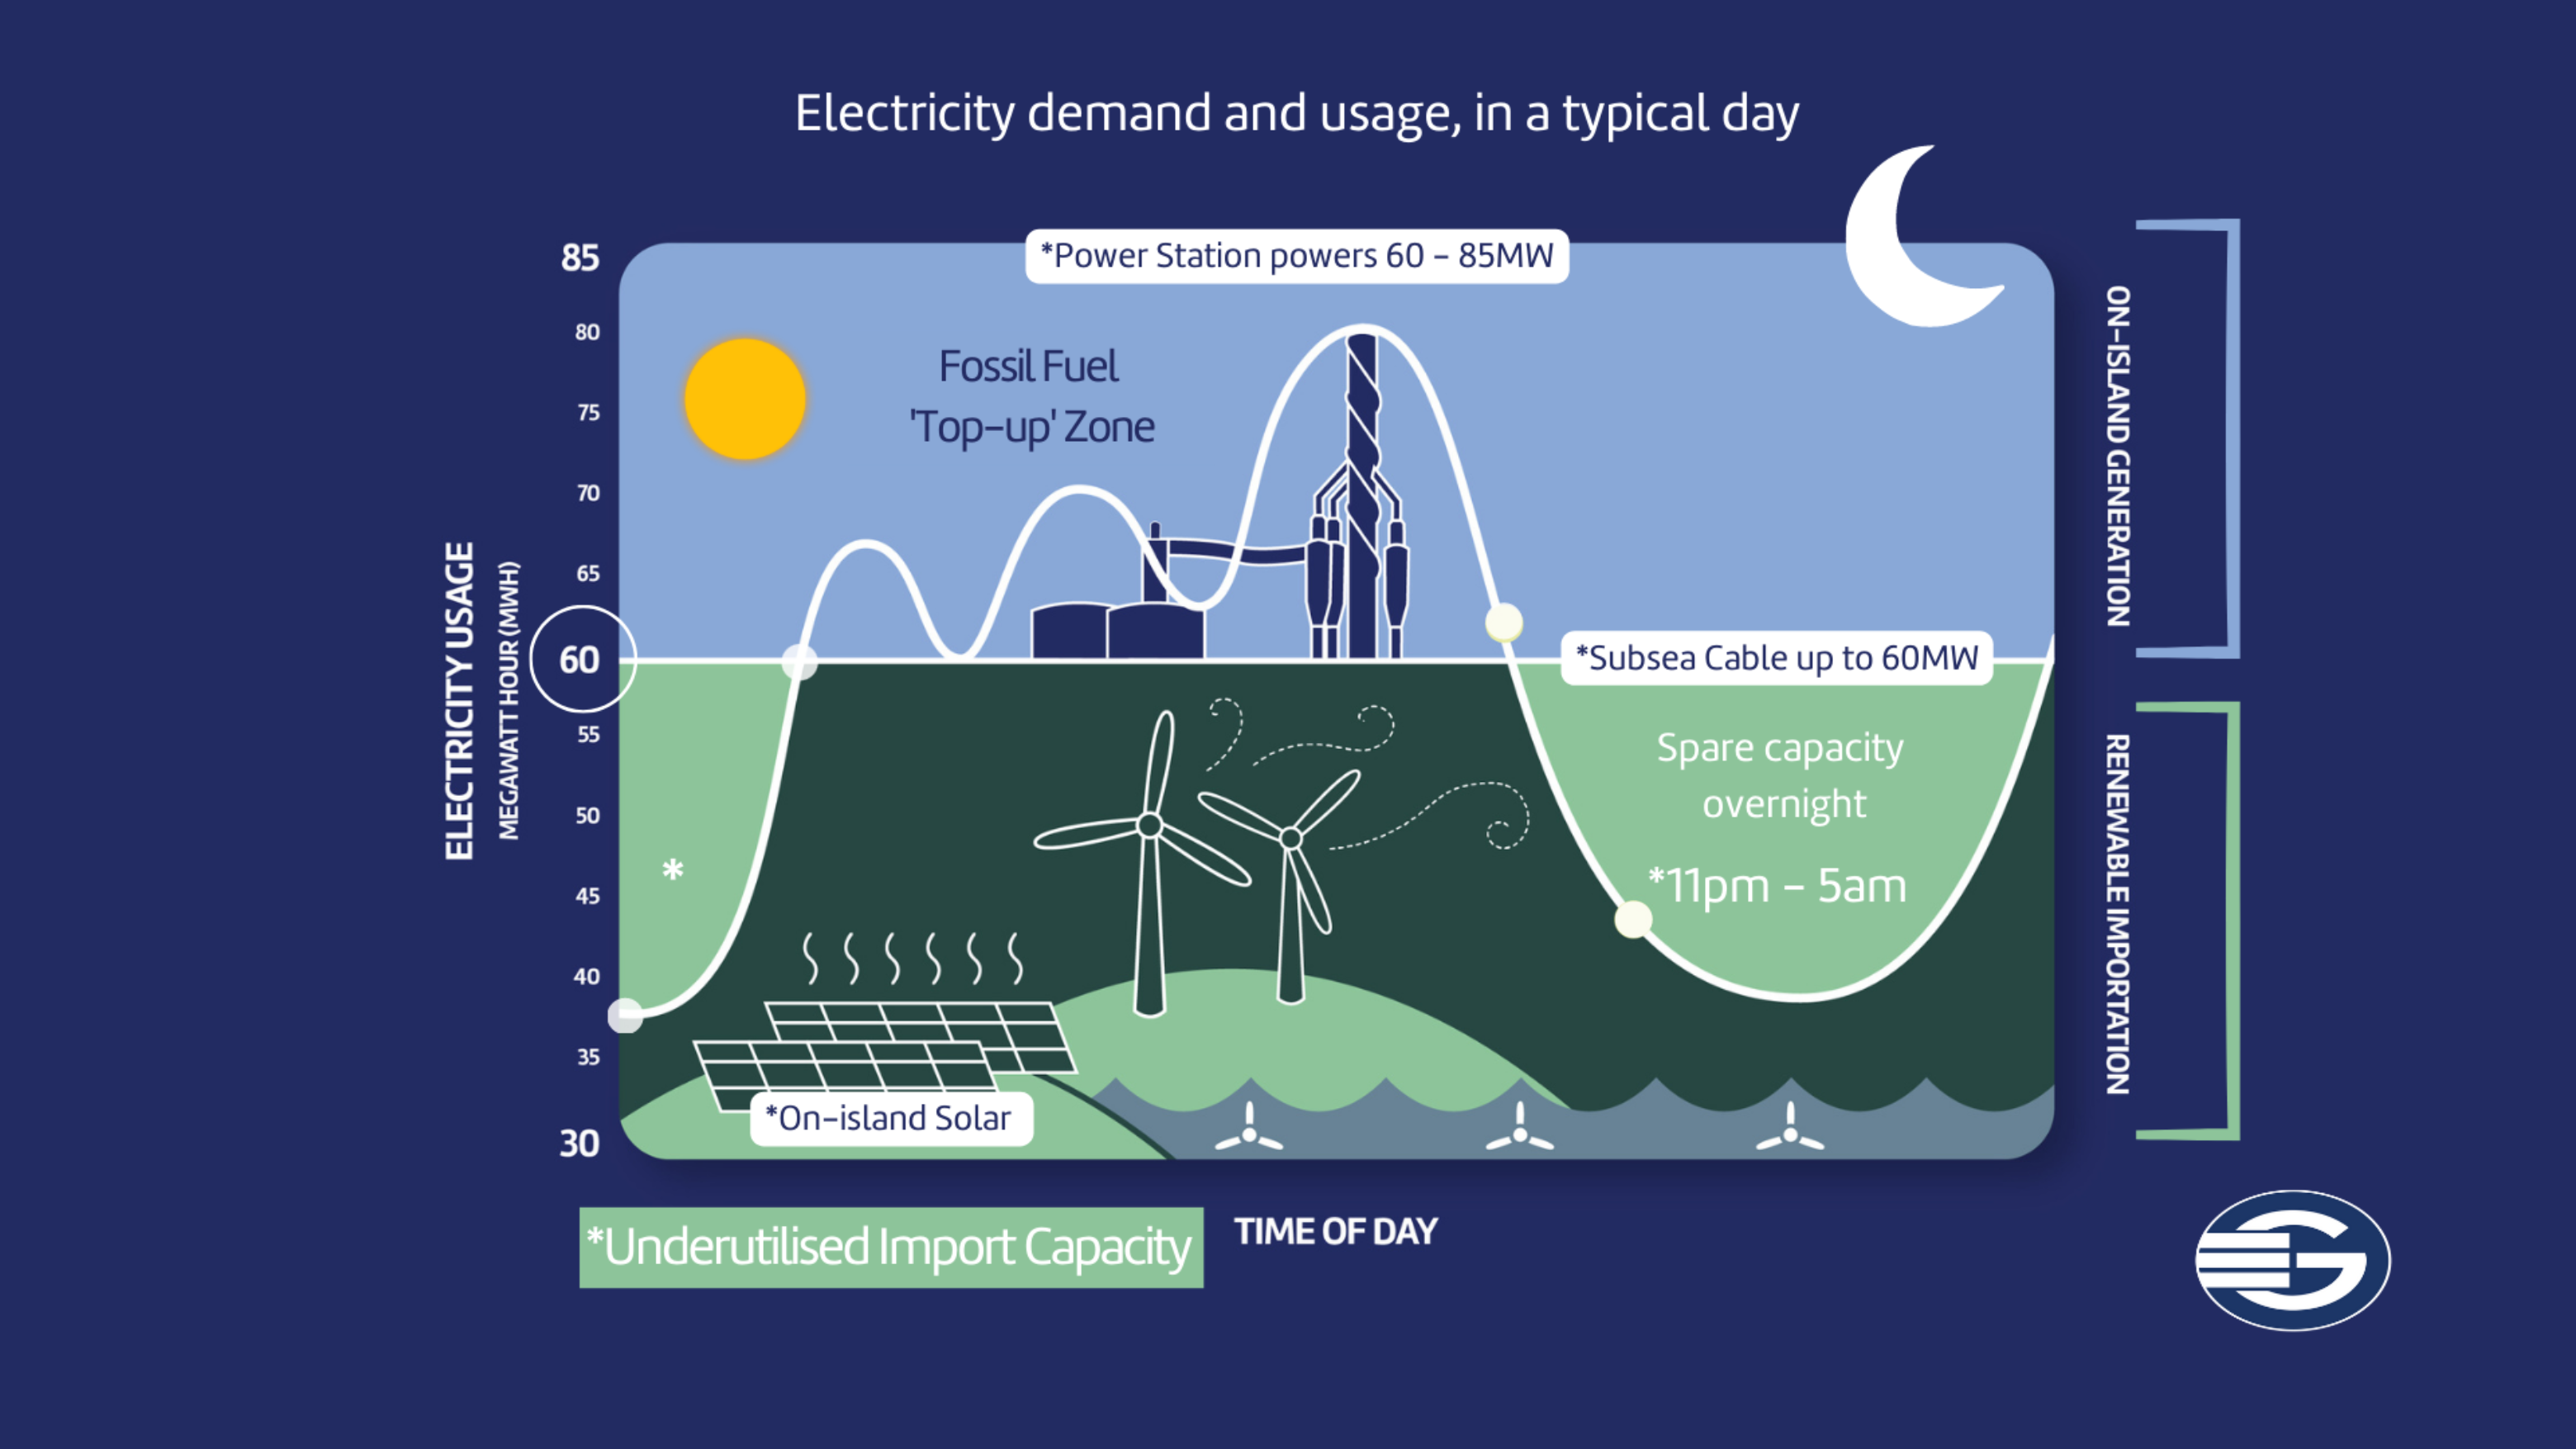 Electricity demand in a typical day graphic.